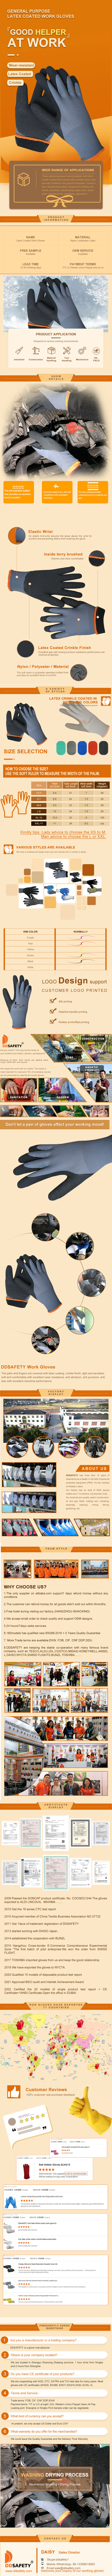 Crinkle Latex Rubber Hand Coated Safety Work Gloves for Men Women General Multi Use Construction Warehouse Gardening Assembly Landscaping - DNL495 Crinkle Latex Rubber Hand Coated Safety Work Gloves for Men Women General Multi Use Construction Warehouse Gardening Assembly Landscaping - DNL495 Crinkle Latex Rubber gloves,Rubber Hand Coated Safety Work Gloves,Work Gloves for Men